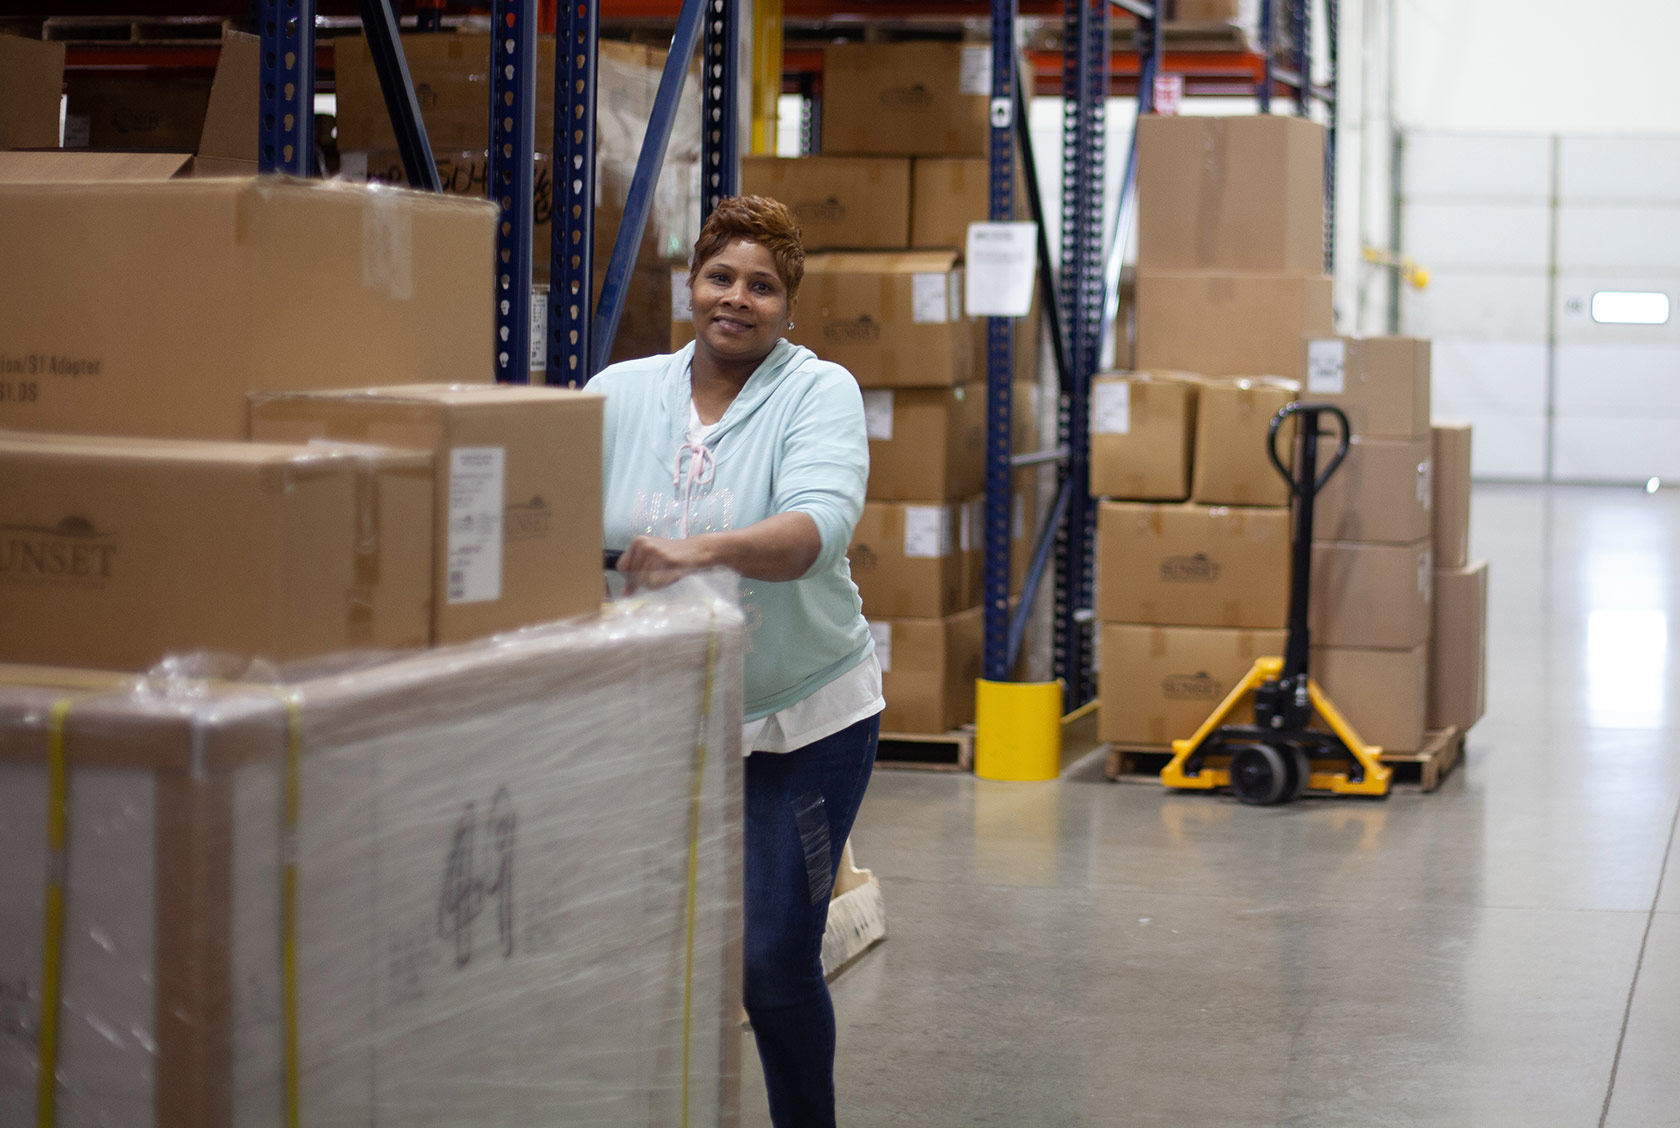 Working at the Sunset Healthcare Solutions distribution center